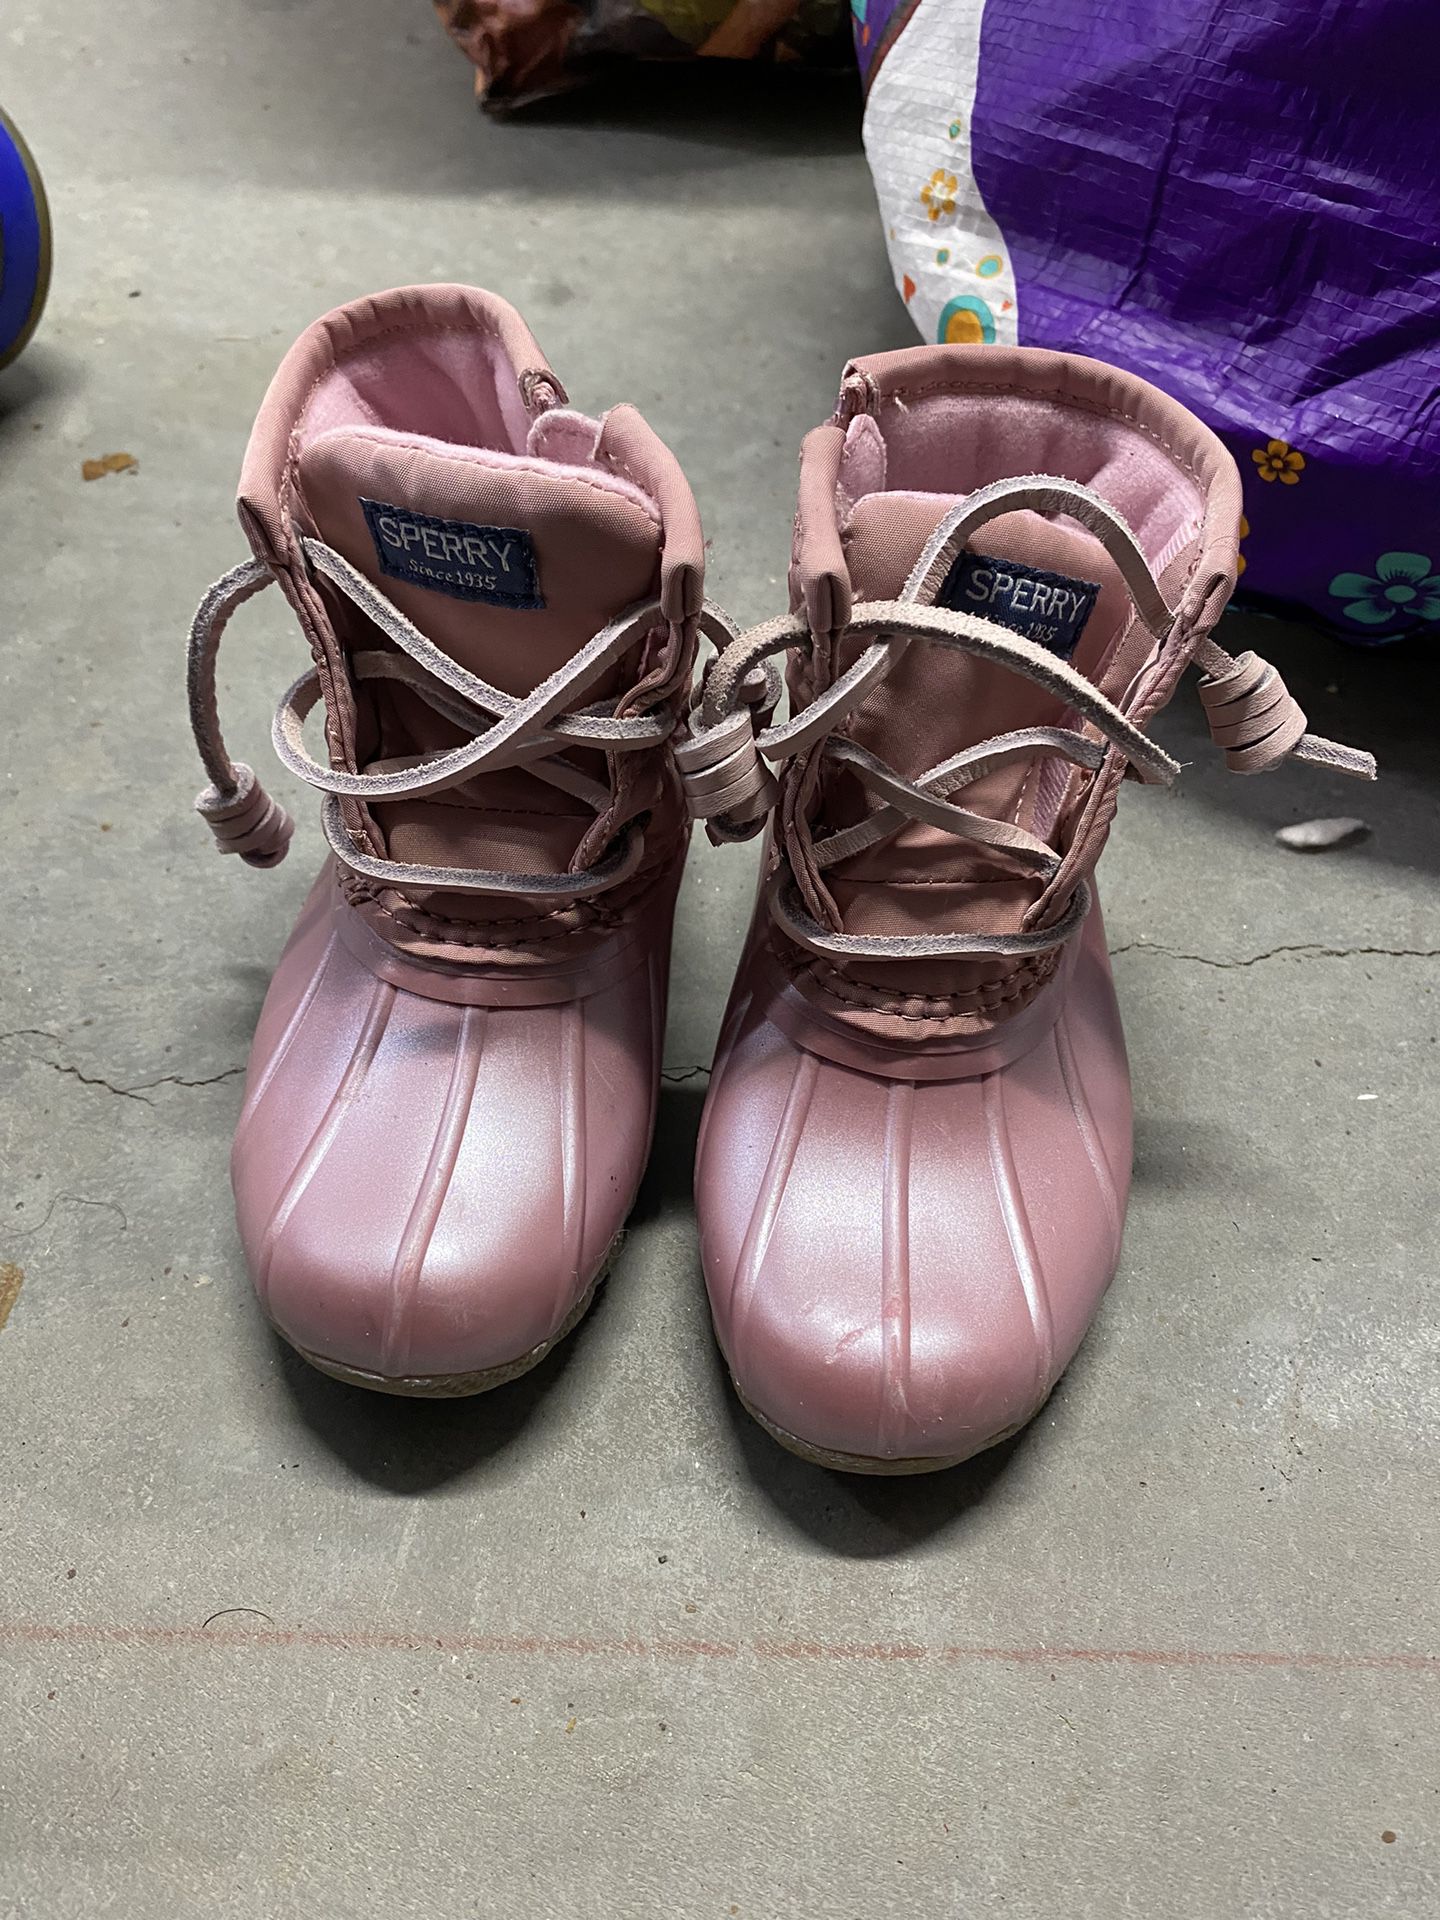 Toddler Sperry Rain Boots